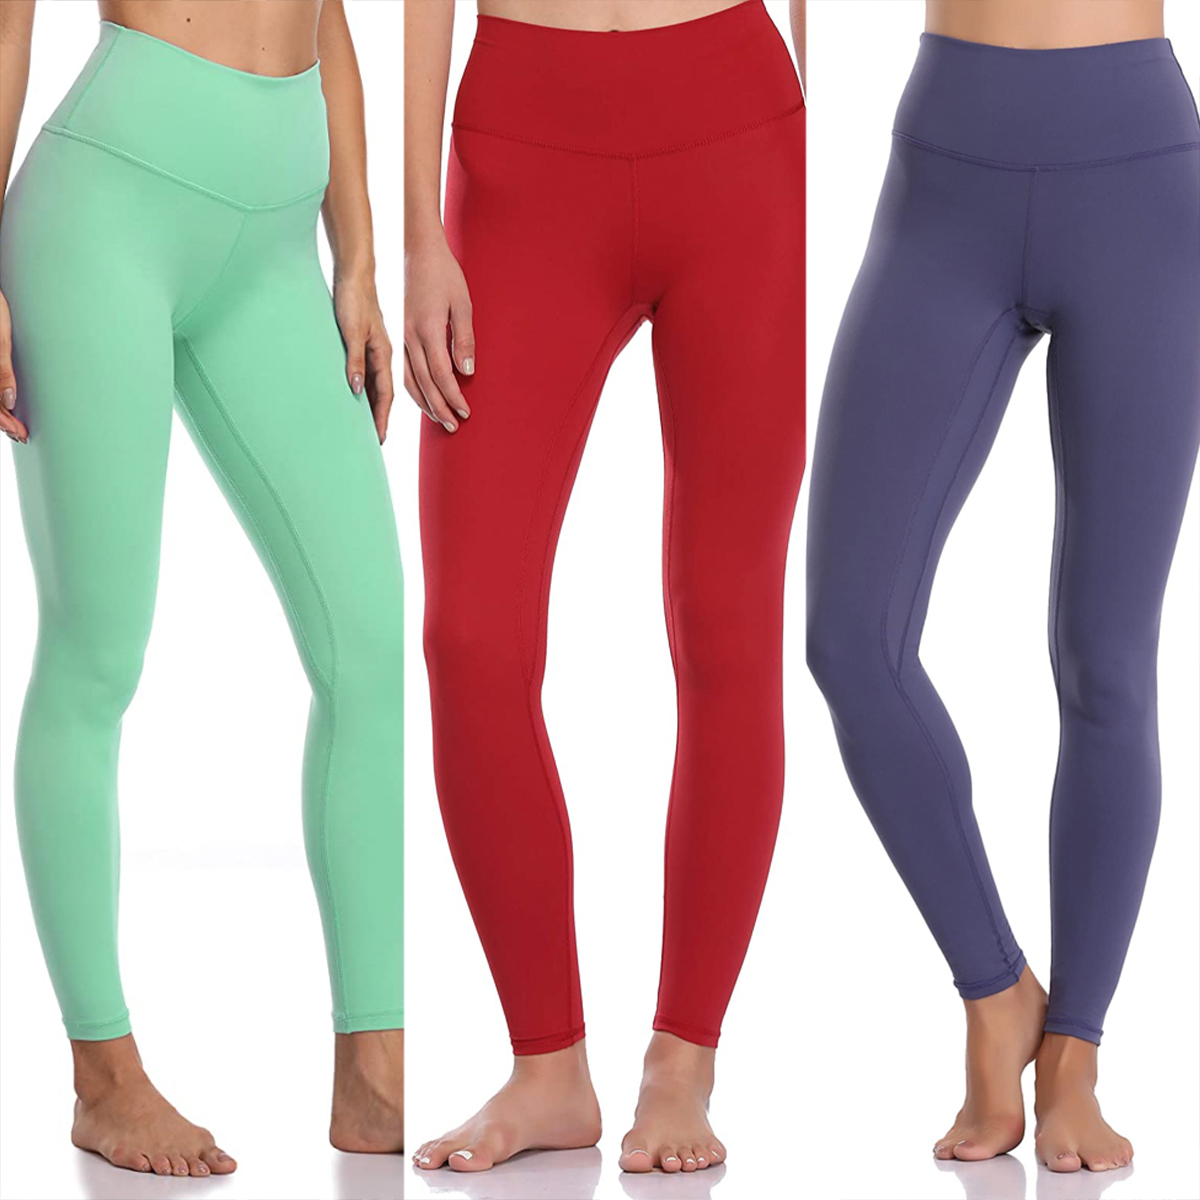 IUGA Leggings HONEST REVIEW . Definitely is worth your coins if you lo, Leggings